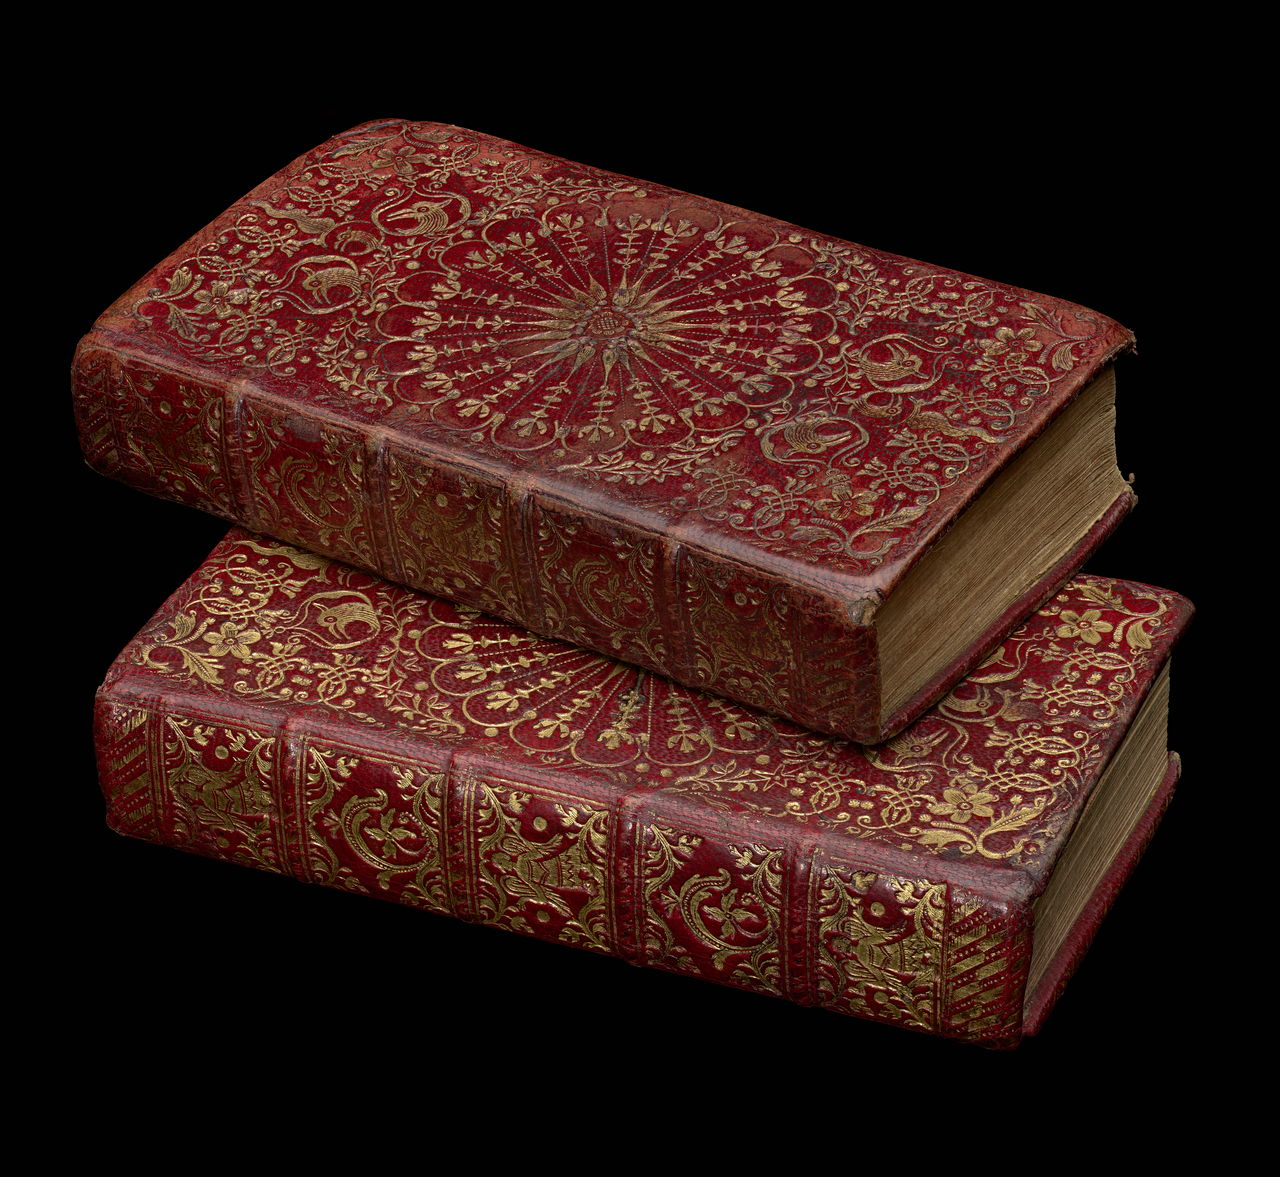 <em>The Holy Bible, containing the Old Testament and the New...</em>, Cambridge, printed by John Archdeacon printer to the University ,1778; <em>The Psalms of David in metre...</em>, Edinburgh, printed by Alexander Kincaid, His Majesty's Printer, 1774, State Library Victoria, Melbourne (RAREEMM 726/6; RAREEMM 726/7)